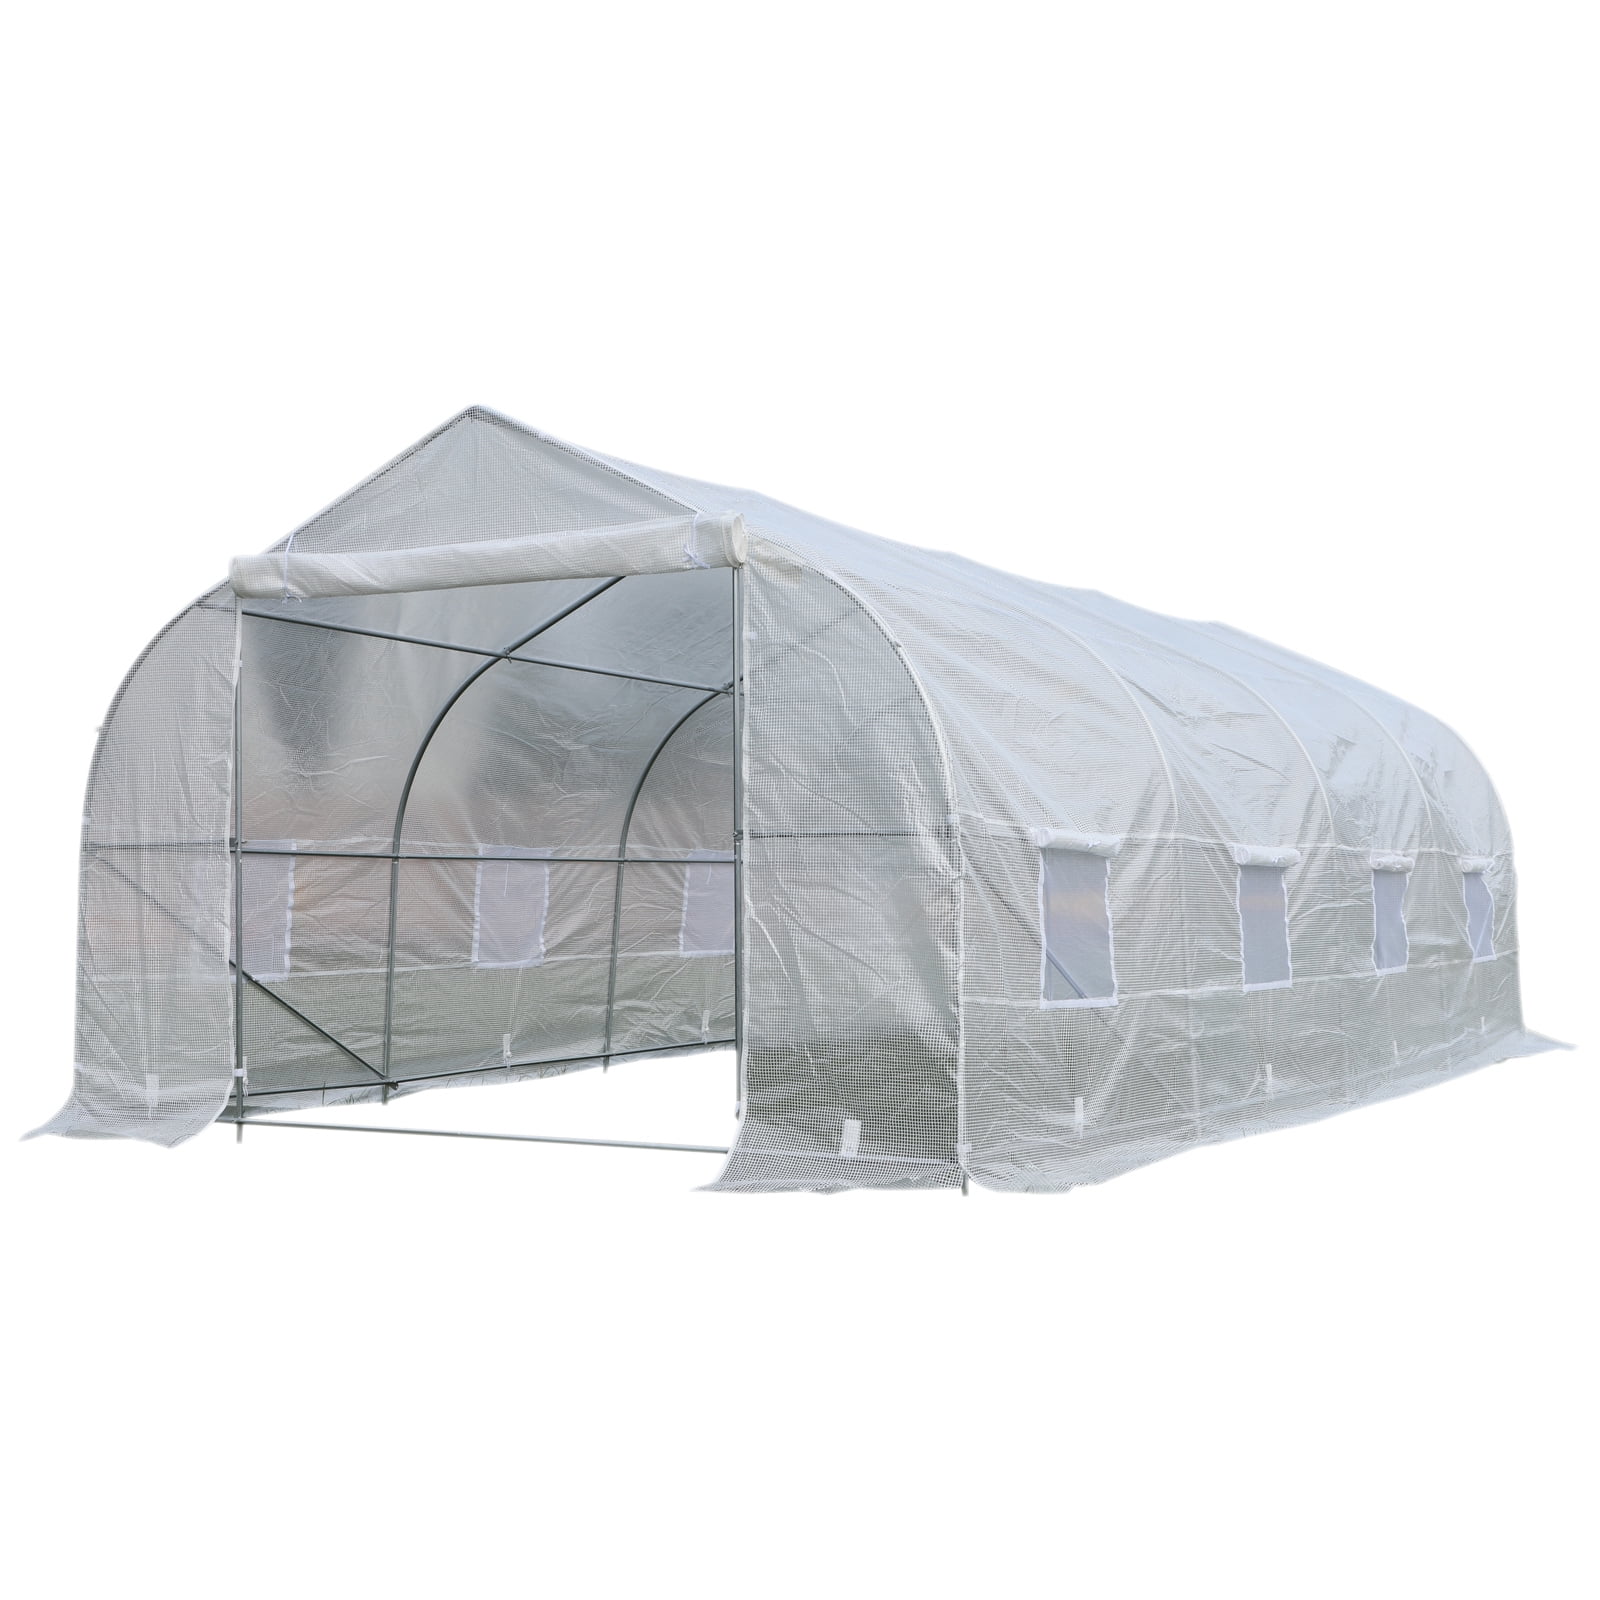 Details about   Home Greenhouse Large Gardening Plant Walk-in Hot Green House Tent 20x10x7FT 